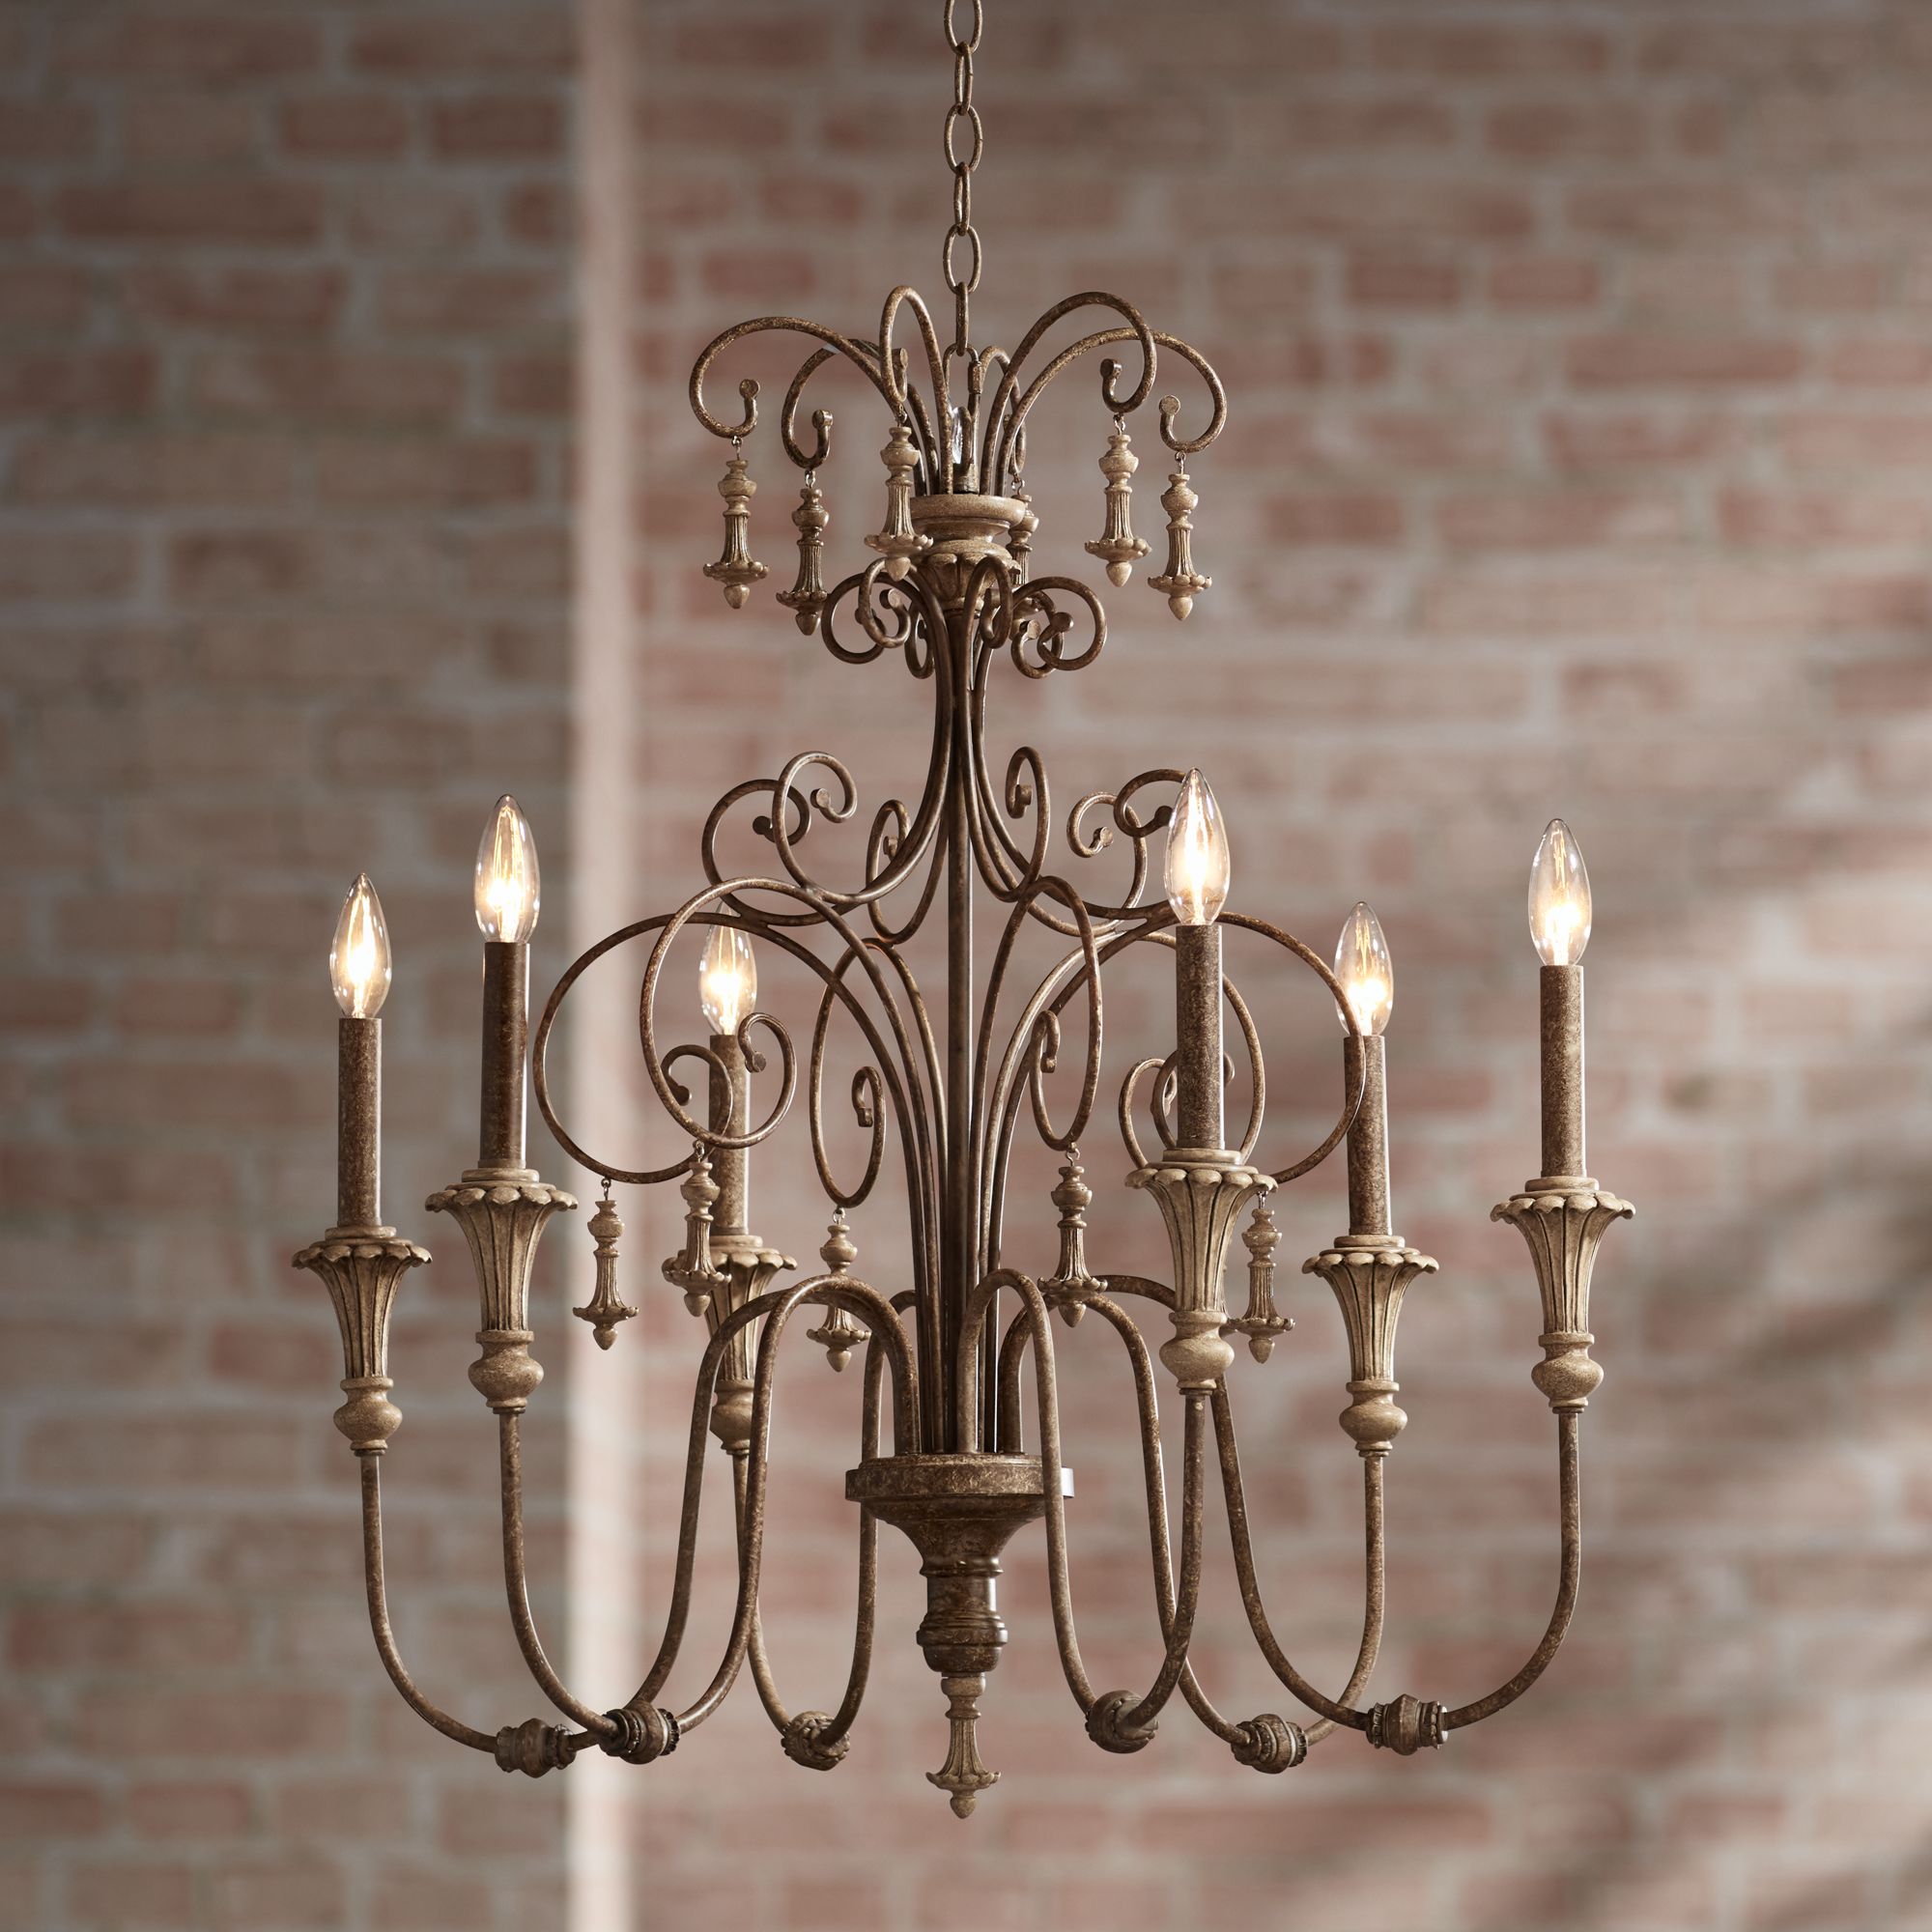 Progress Lighting P4354-20 3 Light Americana Chandelier with Delicate Arms and Decorative Center Column and Candelabra Lamps with Chain and Ceiling Mountings Included Antique Bronze 